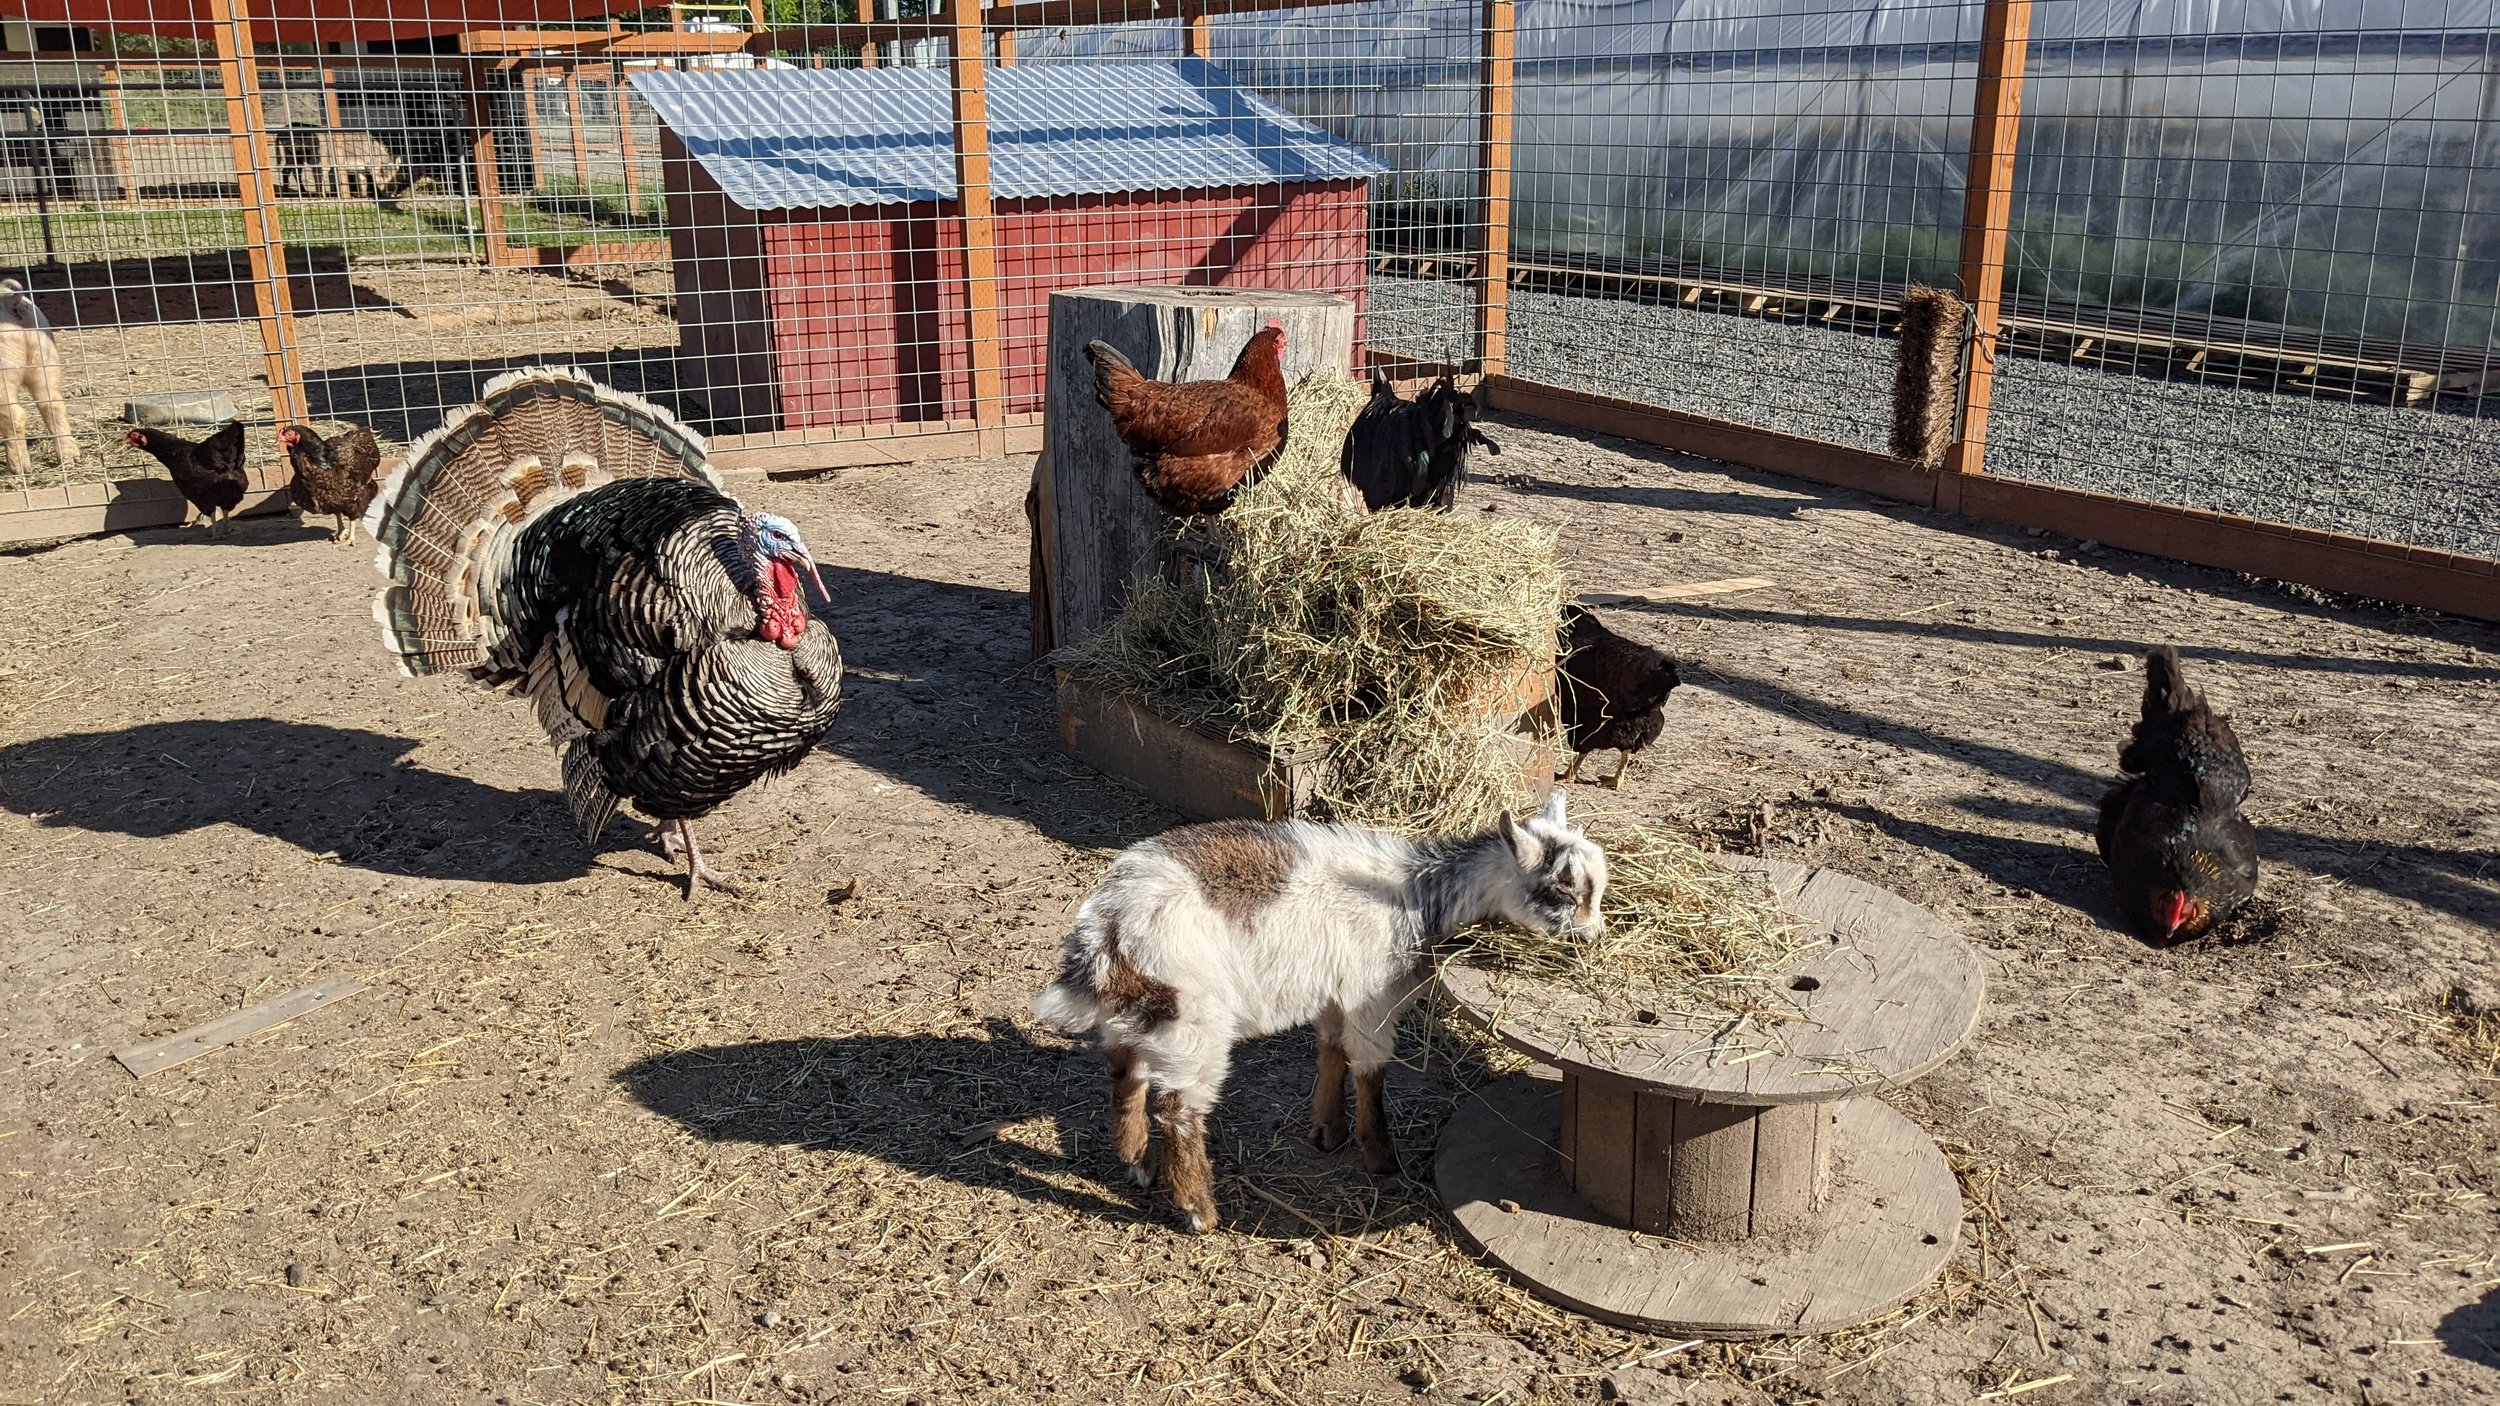  Pros and cons. We have lost very few chickens to hawks and other predators because they are housed with our goats. But sharing the same pen isn’t without issues. Odessa has to stay on top of deworming and other issues that arise by having multiple a